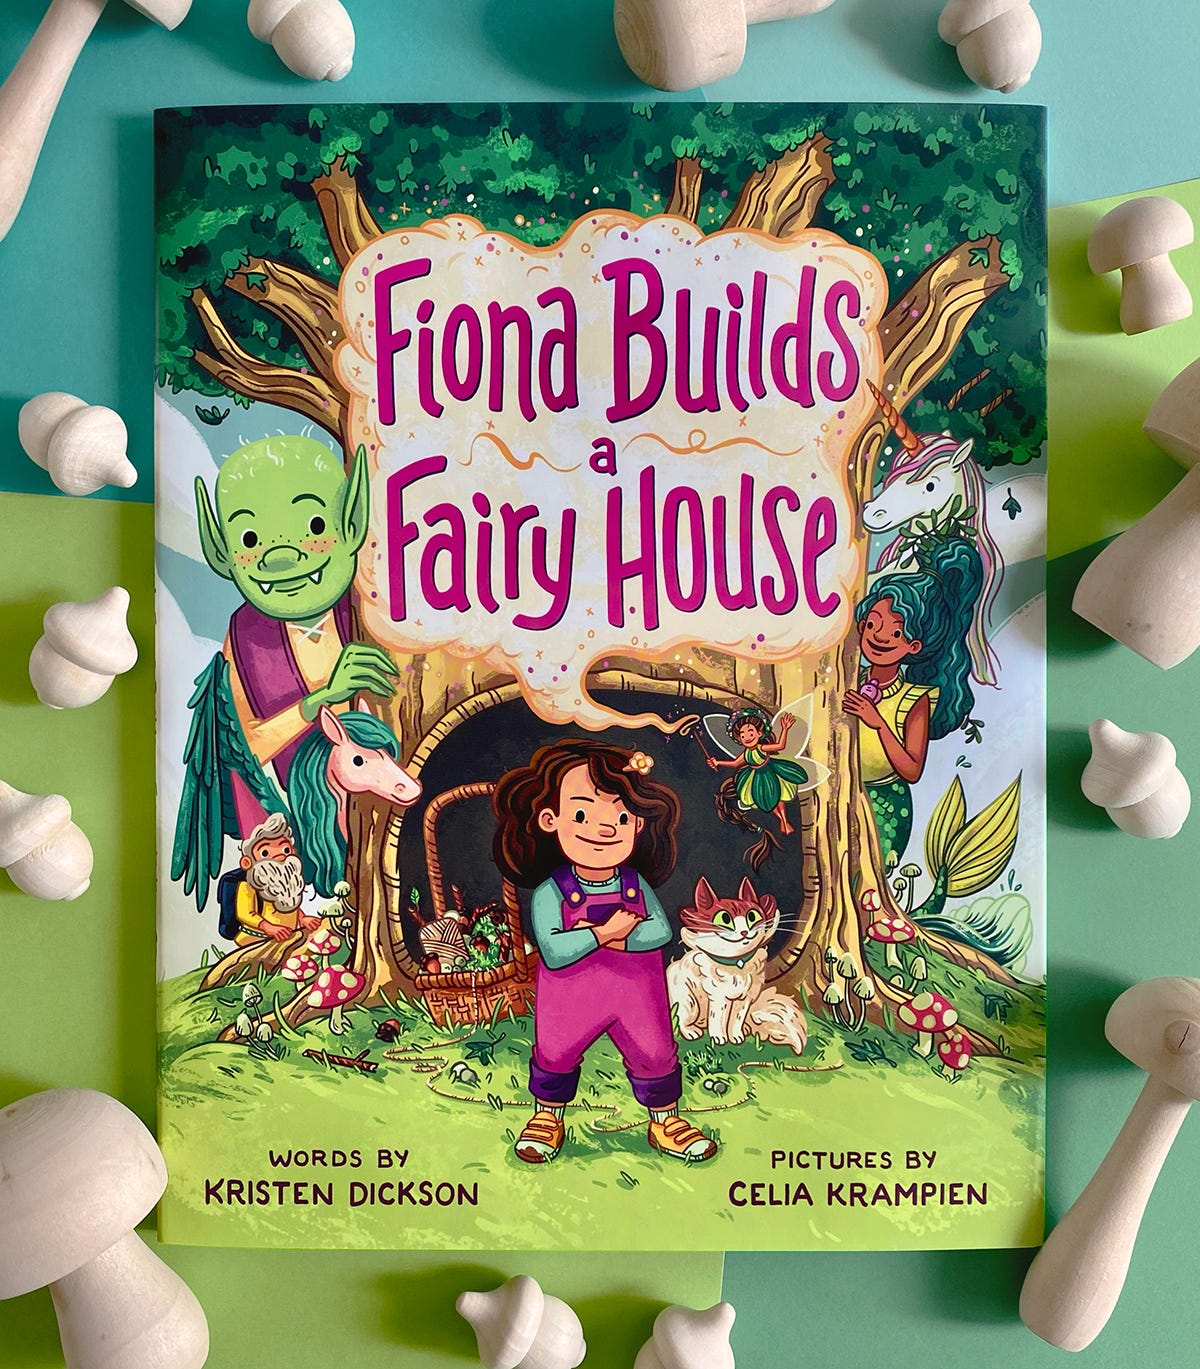 Book FIONA BUILDS A FAIRY HOUSE sitting on a bright paper background surrounded by wooden mushrooms and acorns. The cover shows a young girl with dark, curly hair and bright pink overalls standing in front of a huge tree with a round hollow. She's surrounded by smiling fairytale creatures as well as a cat and basket of foraged building supplies.